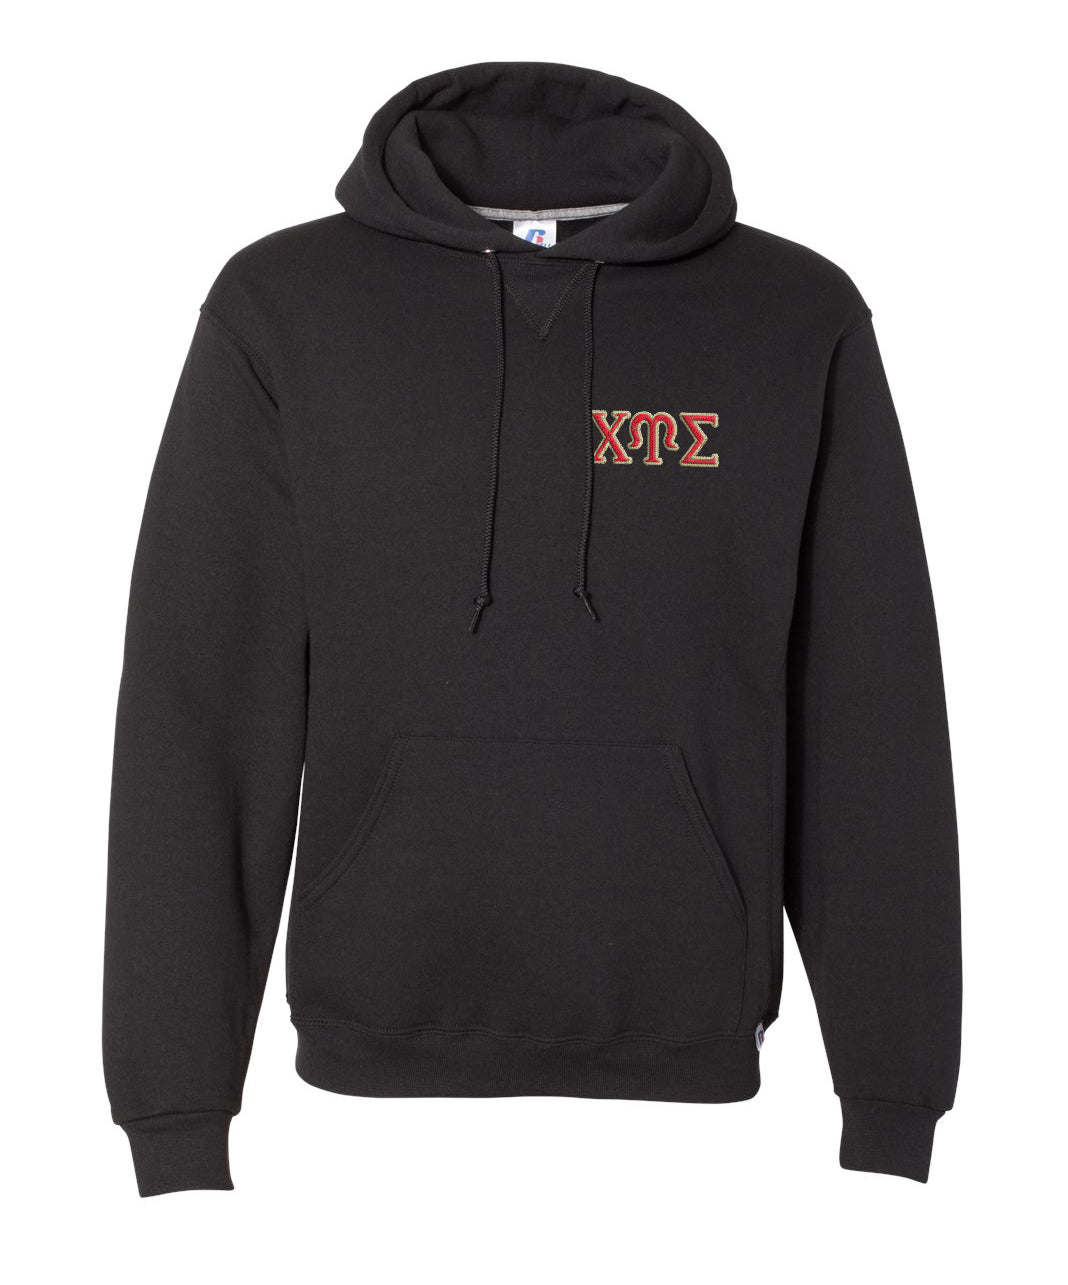 Chi Upsilon Sigma Embroidered Hoodie ** need in red and beige